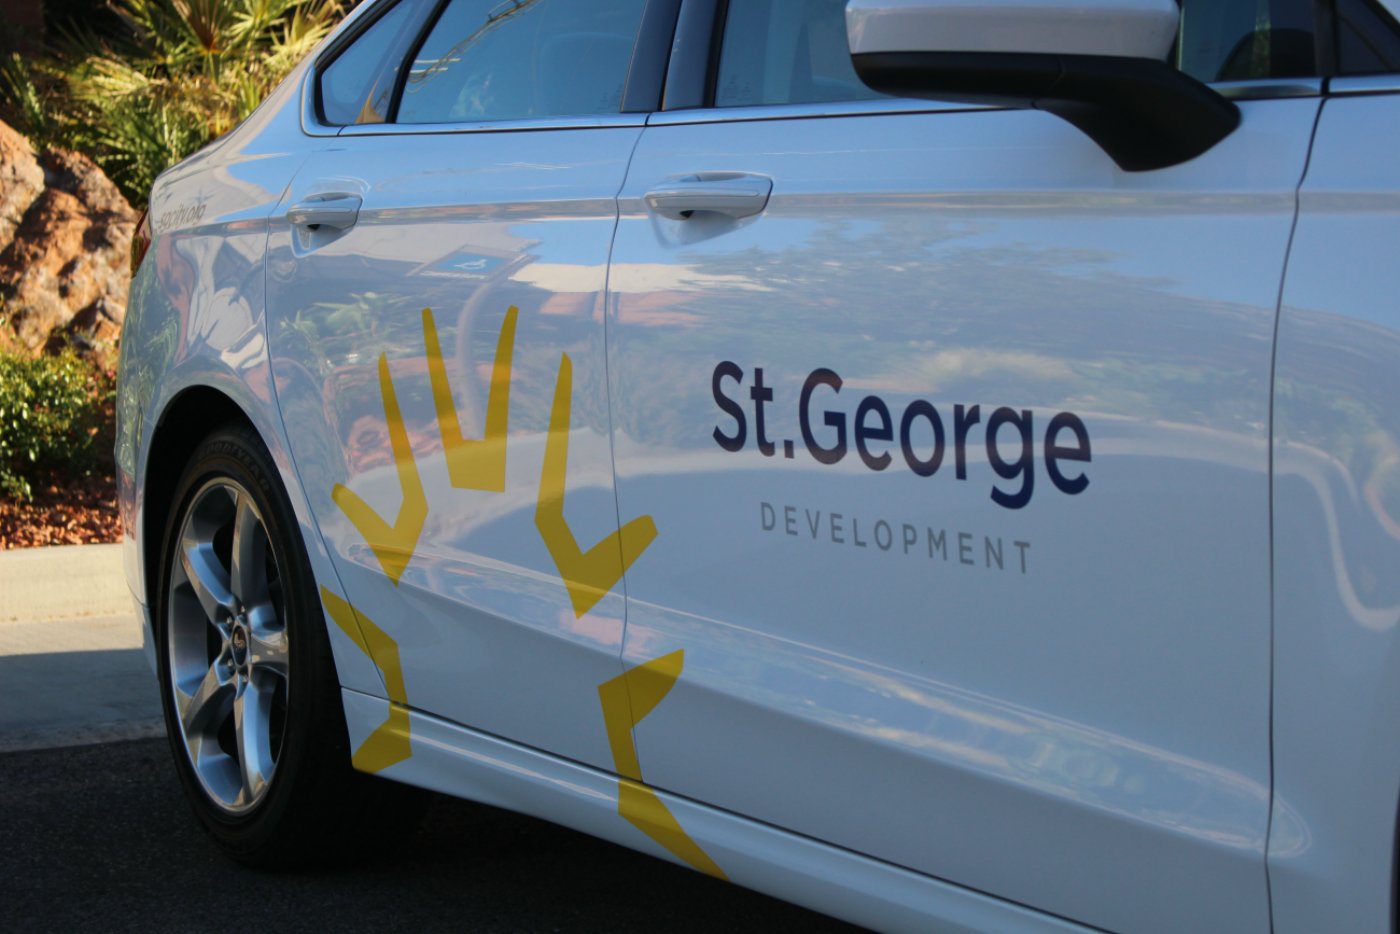 The new logo of the City of St. George as it will appear on city vehicles. The new logo was rolled out July 7, 2016, and is anticipated to be phased in citywide over the next two years, St. George, Utah, July 7, 2016 | Image courtesy of the City of St. George, St. George News